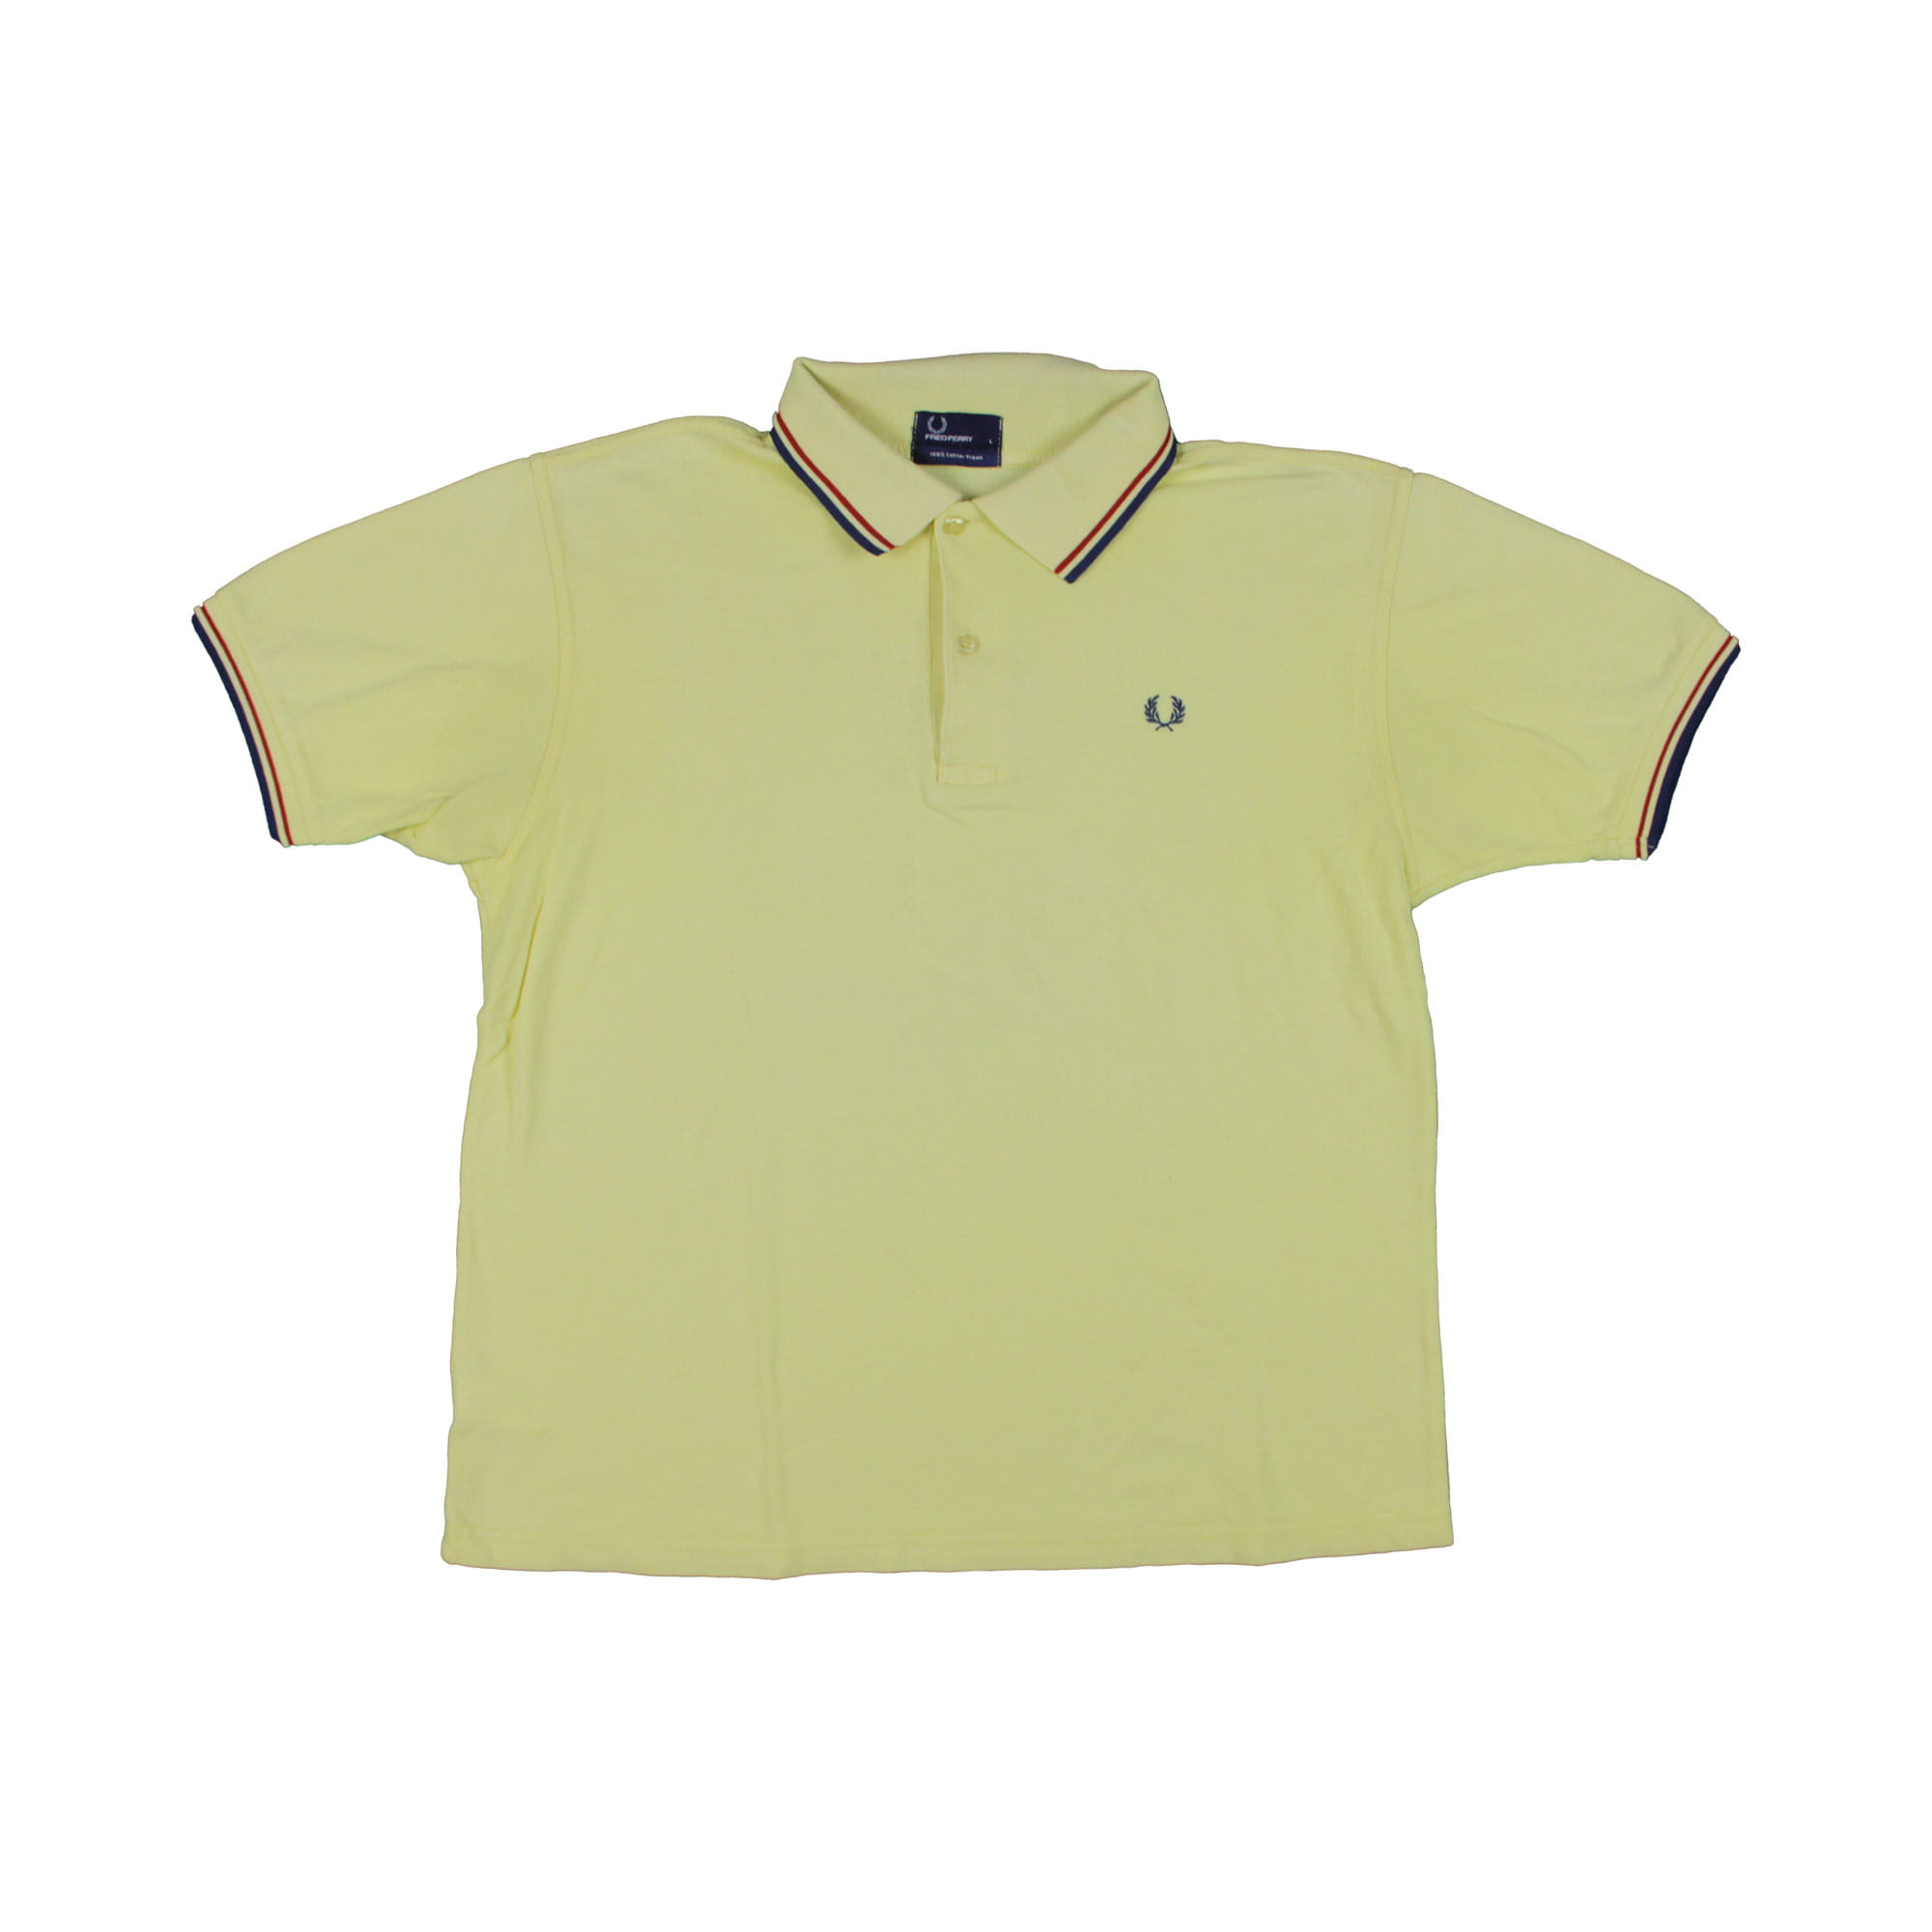 Fred Perry Vintage Polo T-Shirt - L